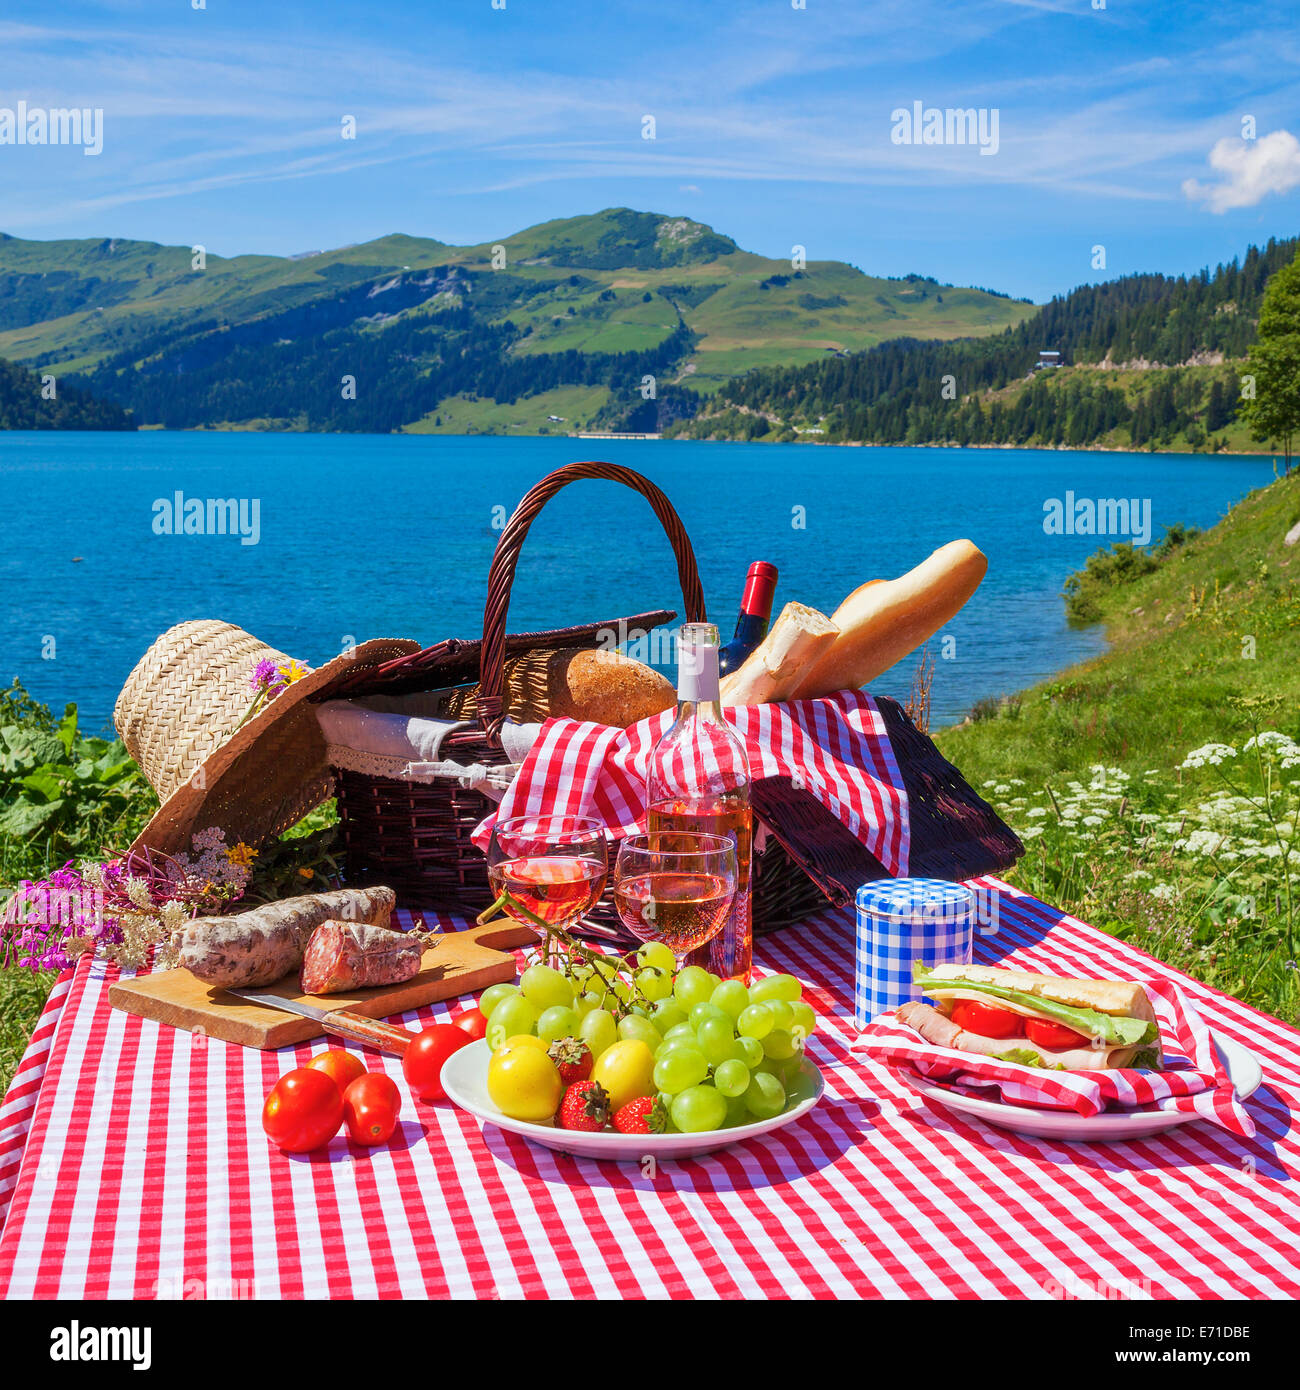 Picnic in alpine mountains with lake on background, panoramic view Stock Photo